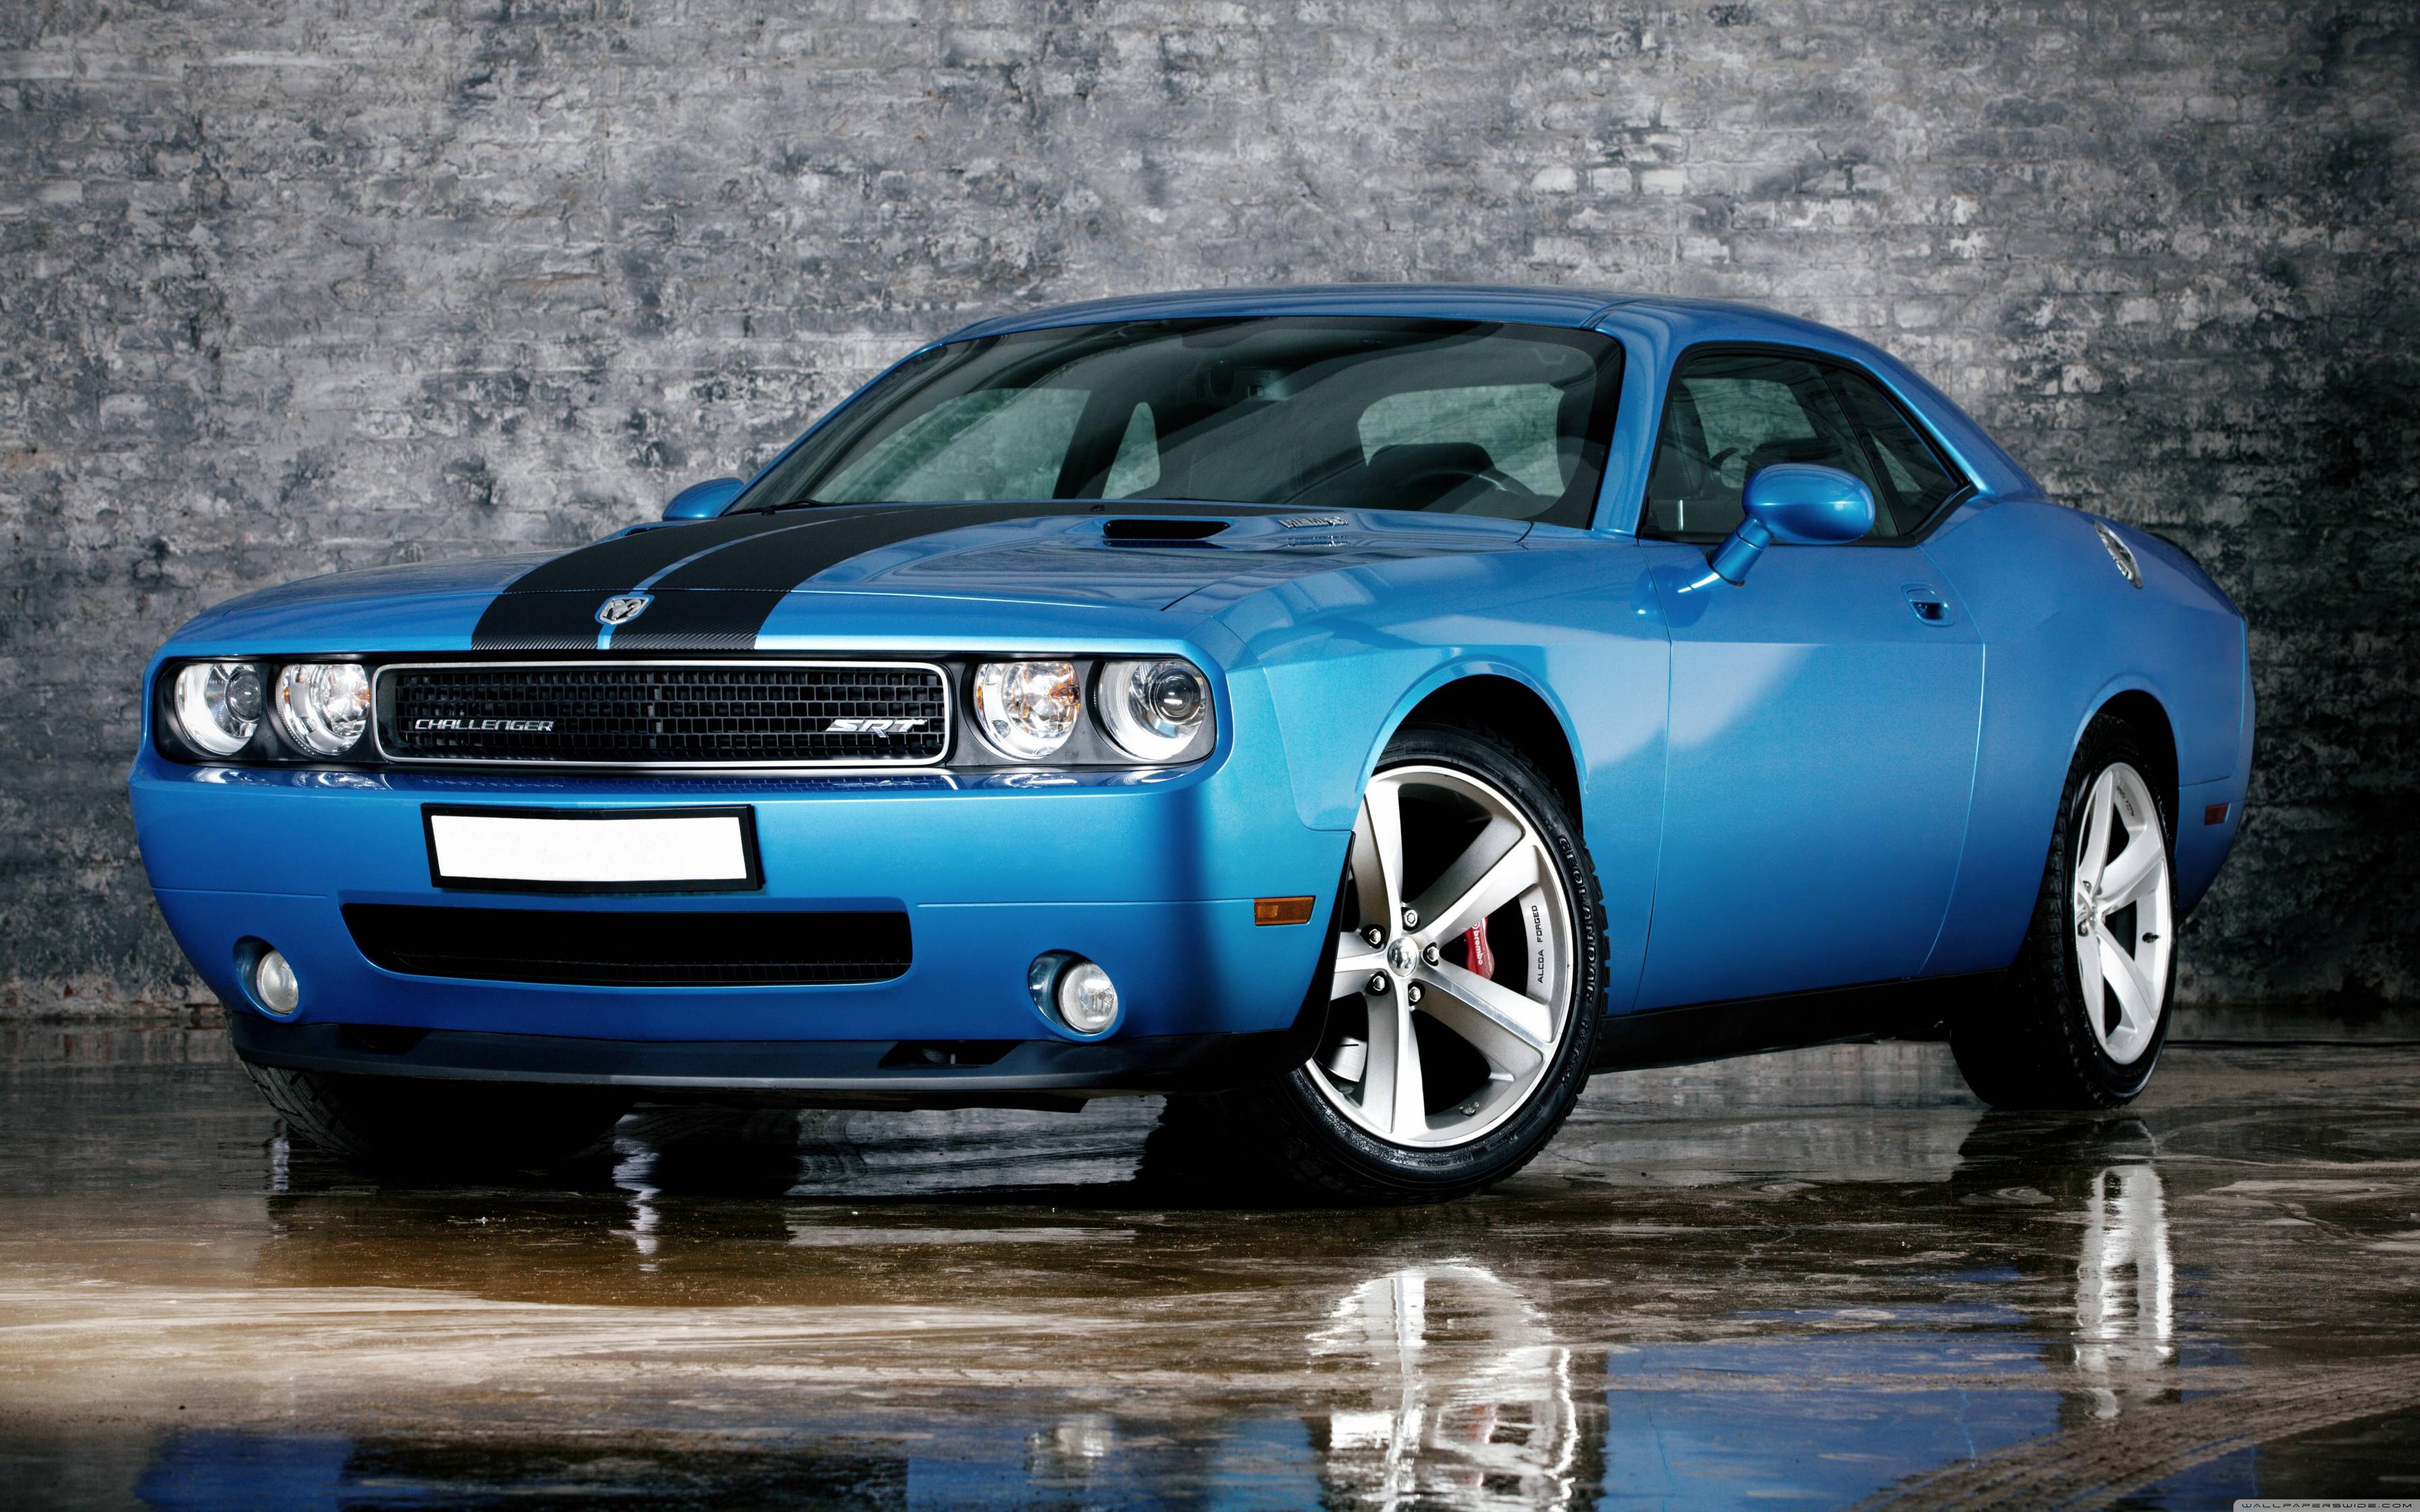 Dodge challenger iphone backgrounds Archives - of 4